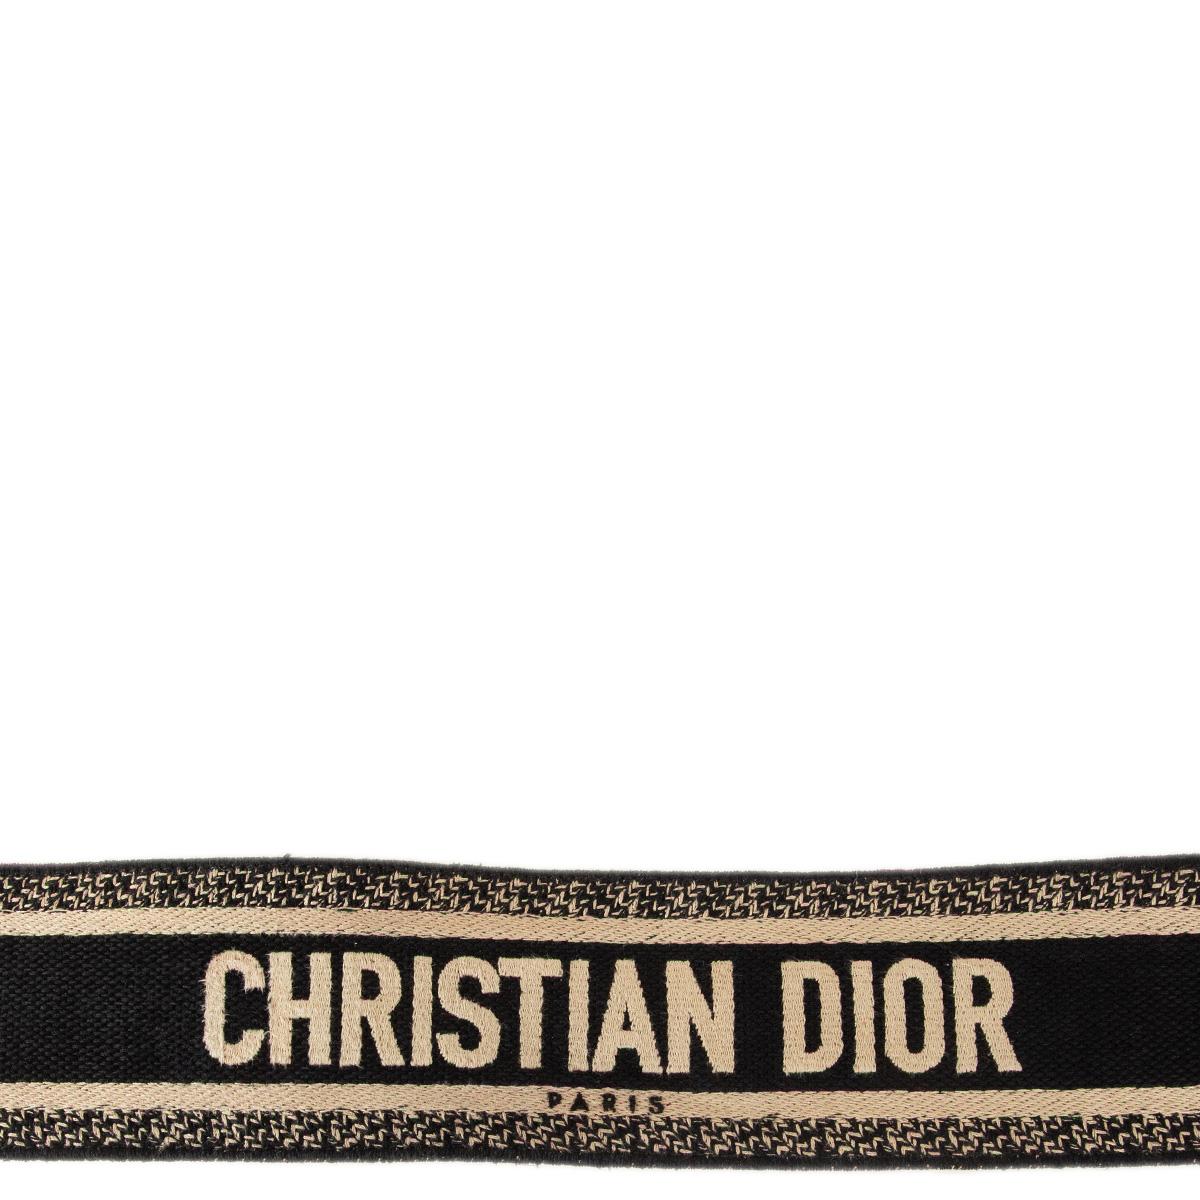 100% authentic Christian Dior embroidered shoulder-strap in taupe and black canvas is characterised by a bold ‘Christian Dior’ signature. Crafted using a fully embroidered technique, the strap is a way to customise and add a personal touch to the